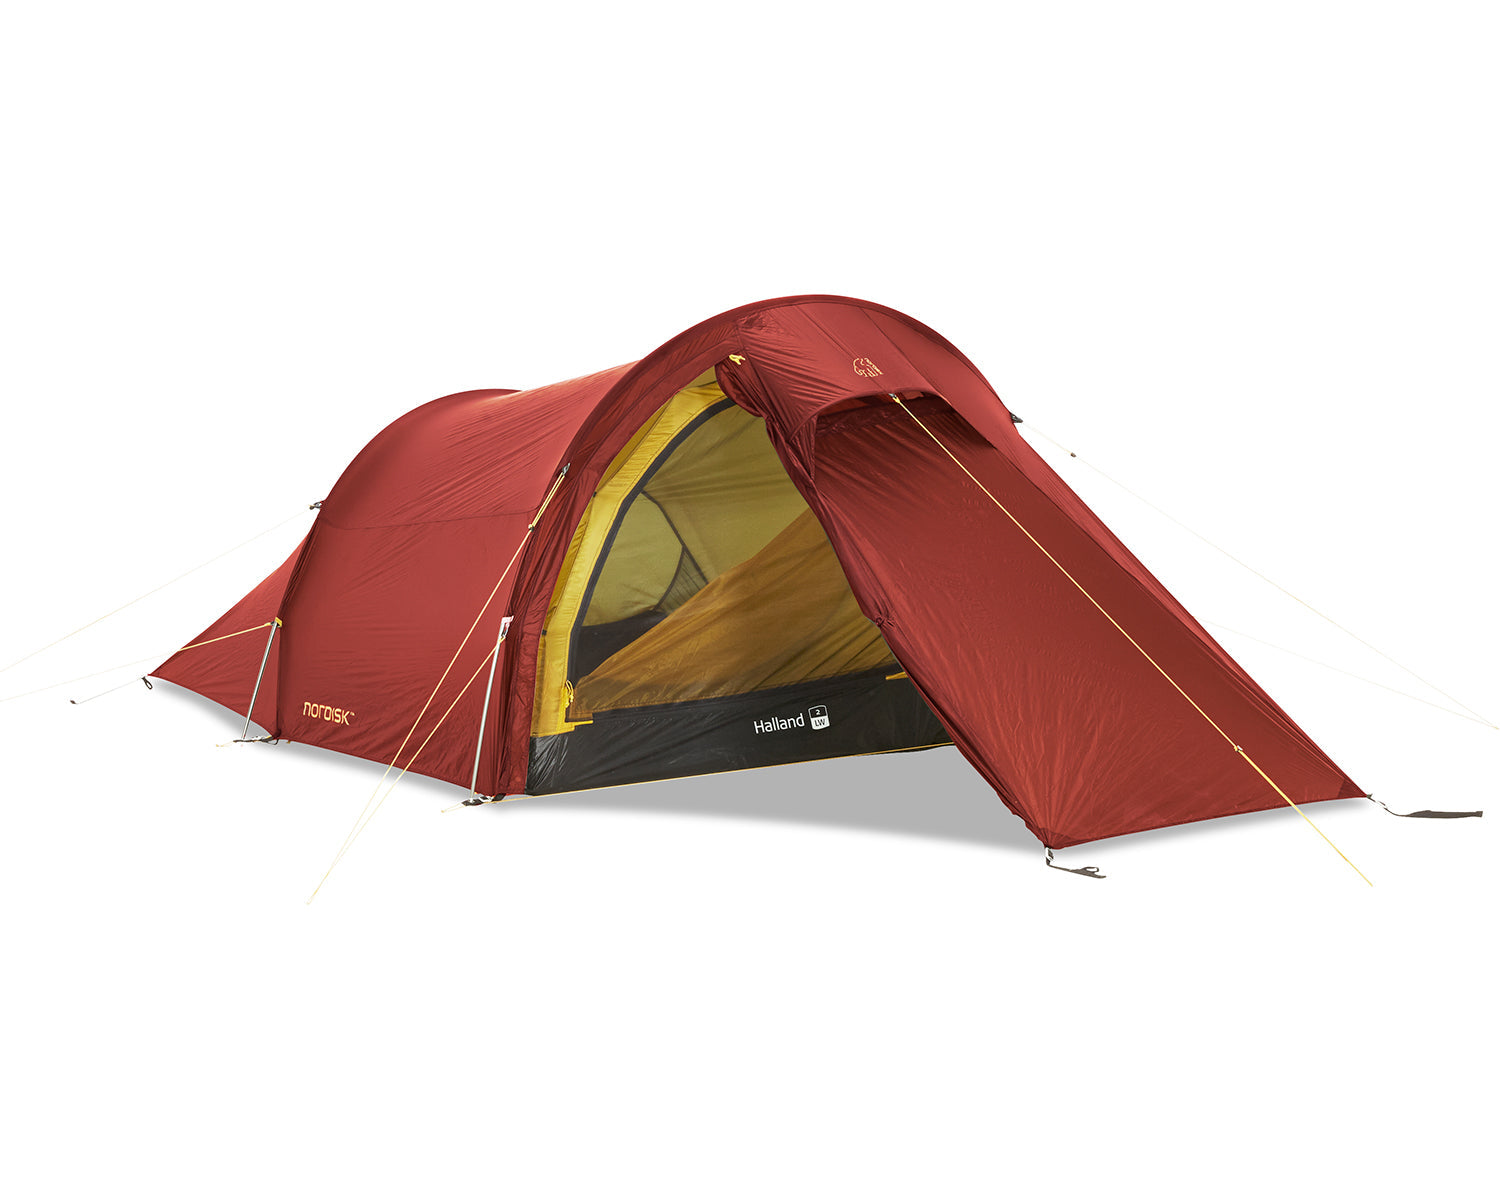 Halland 2 LW tent - 2 person - Burnt Red